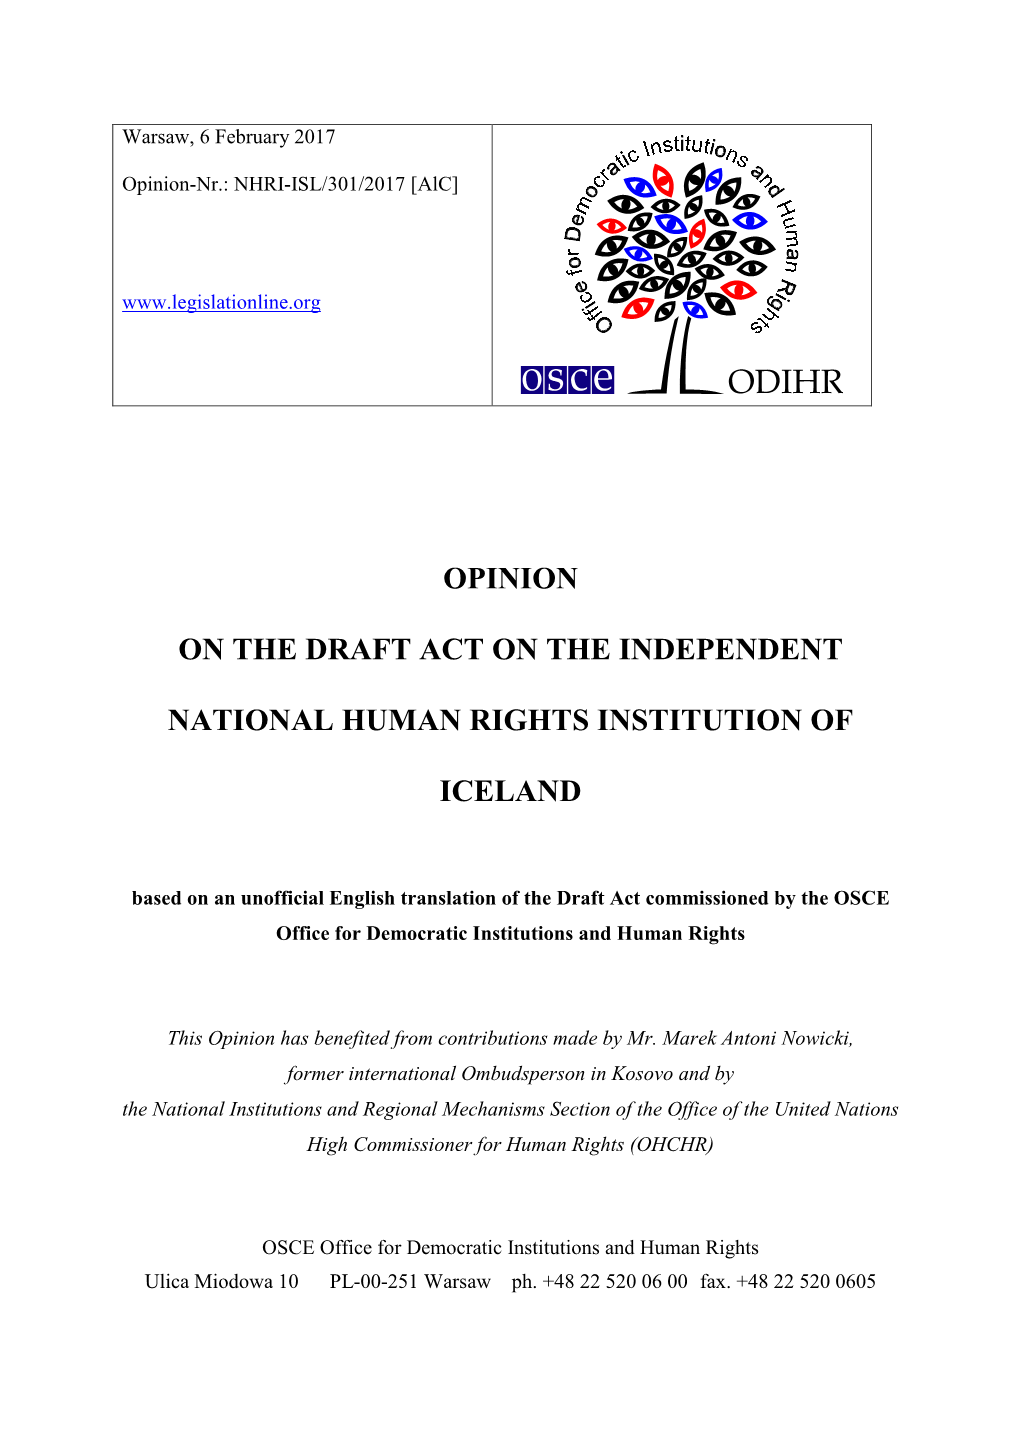 Opinion on the Draft Act on the Independent National Human Rights Institution of Iceland